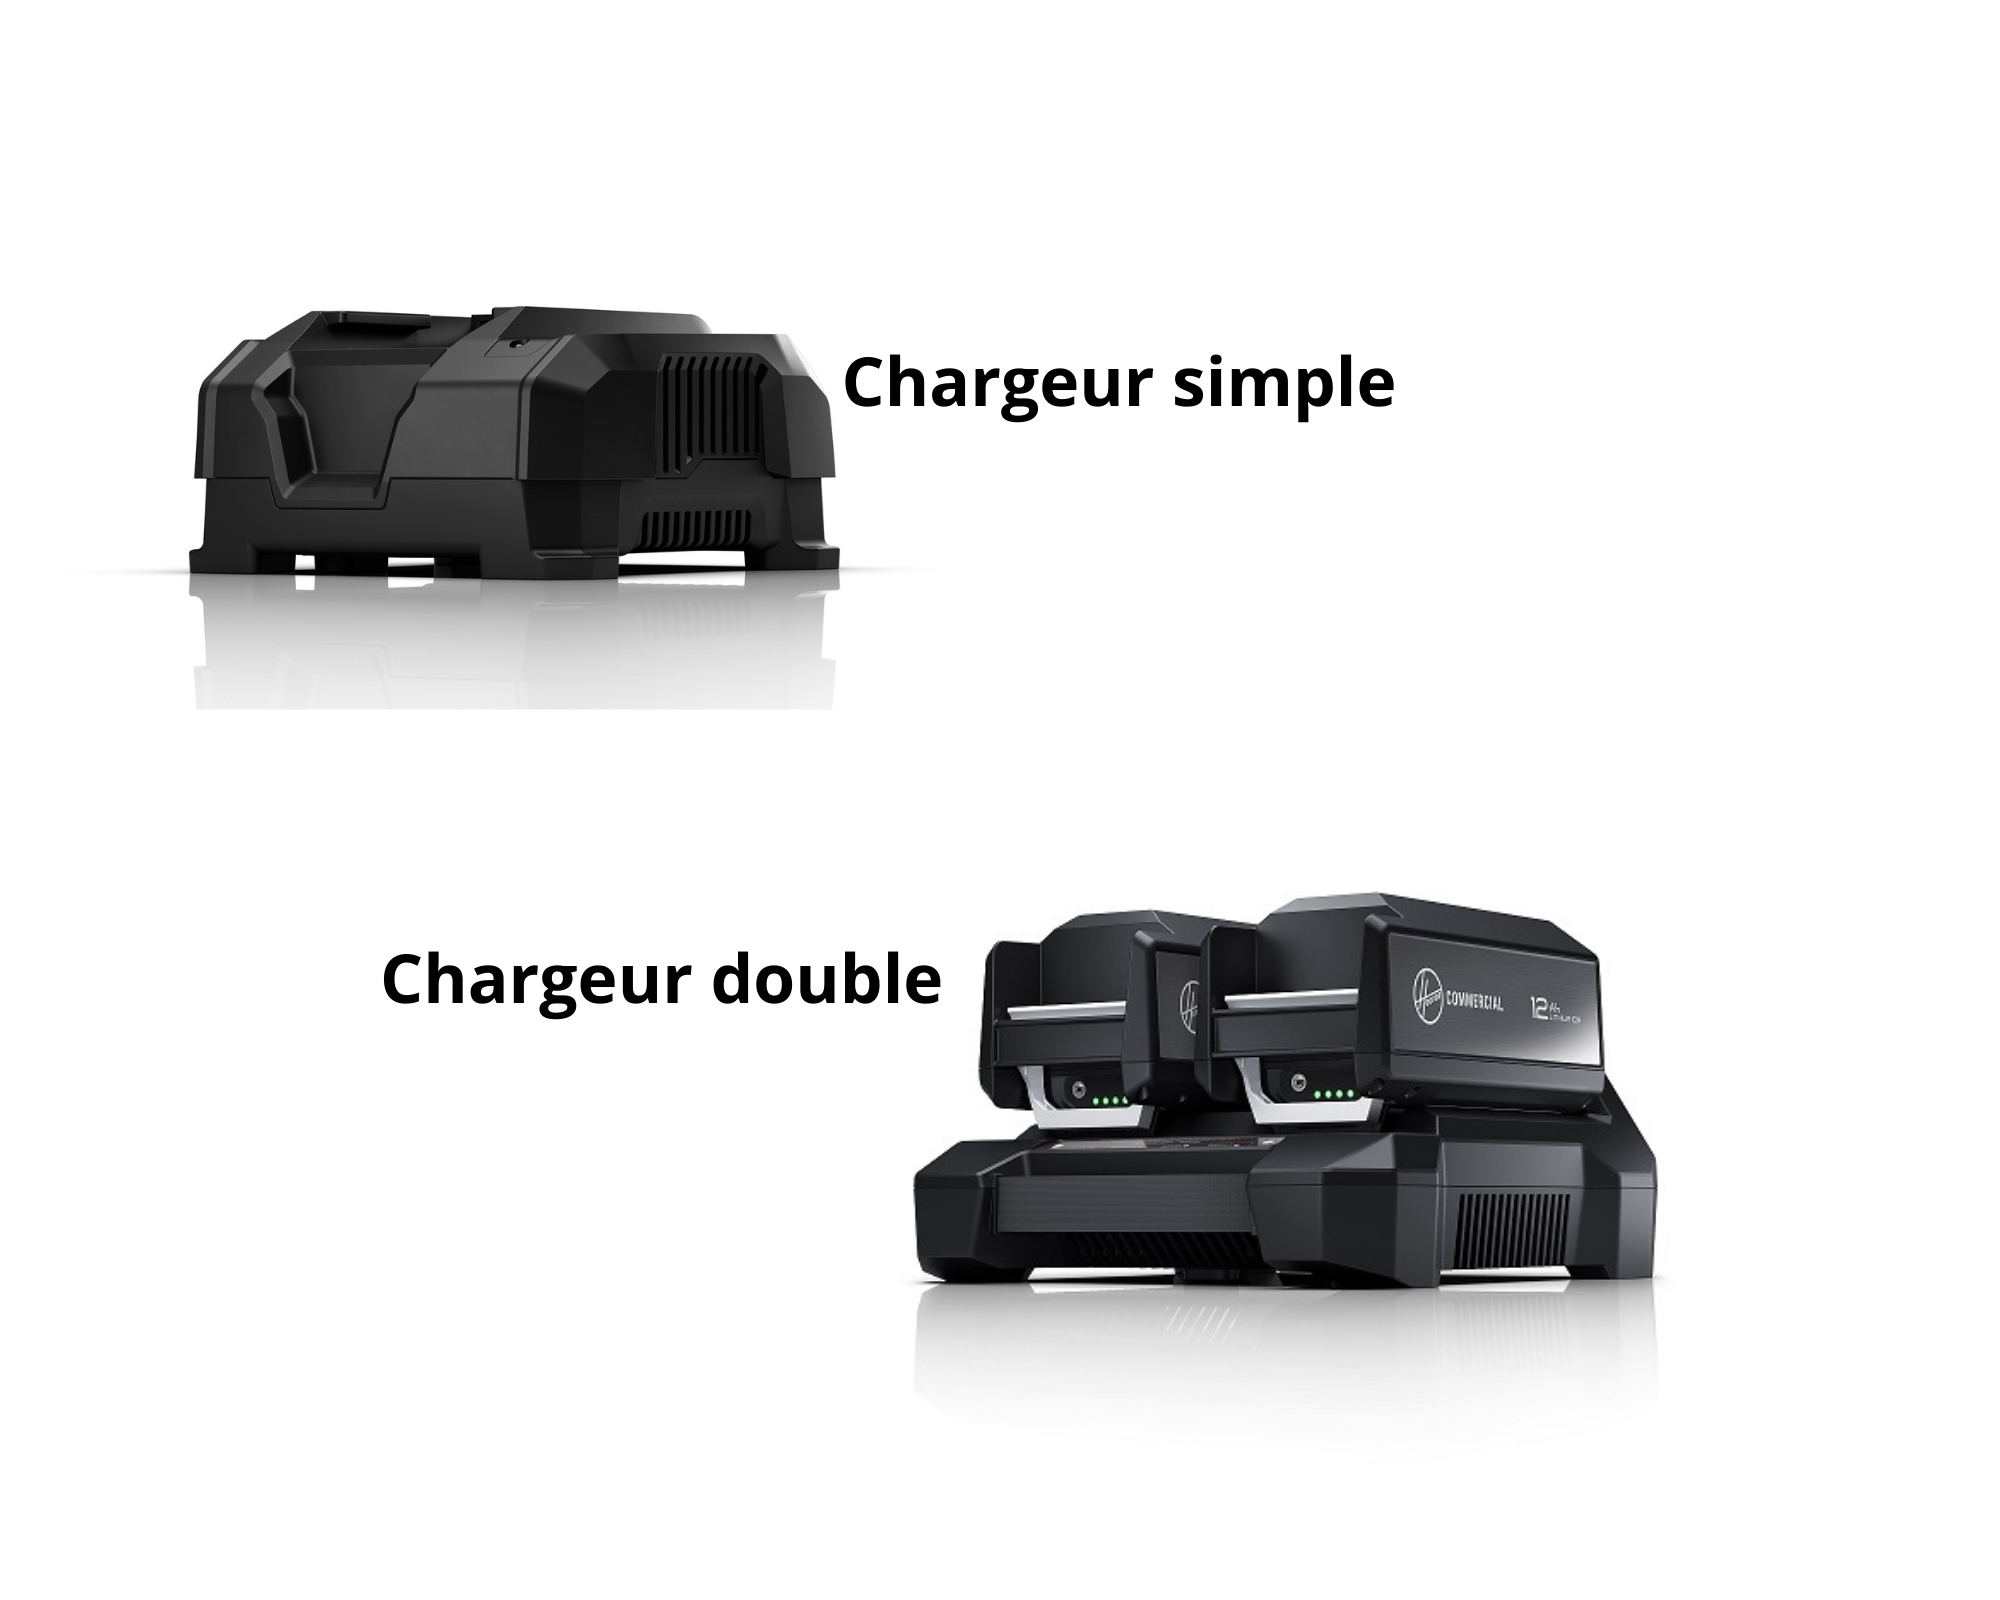 Chargeur simple